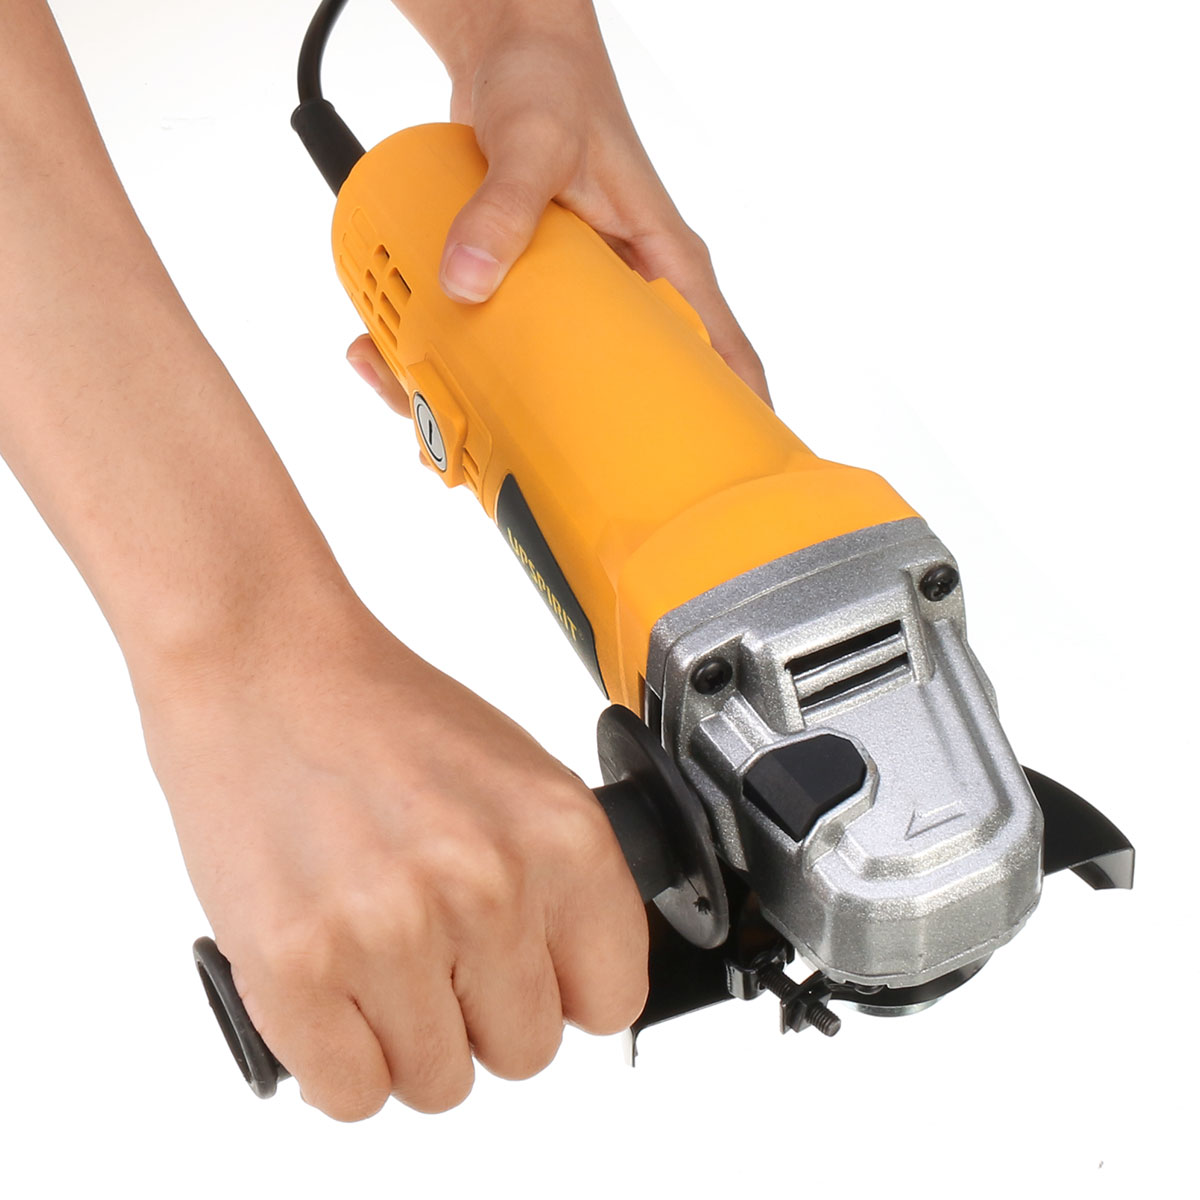 700W-Electric-Angle-Grinder-100mm-Polishing-Polisher-Grinding-Cutting-Tool-10000RPM-1560434-1